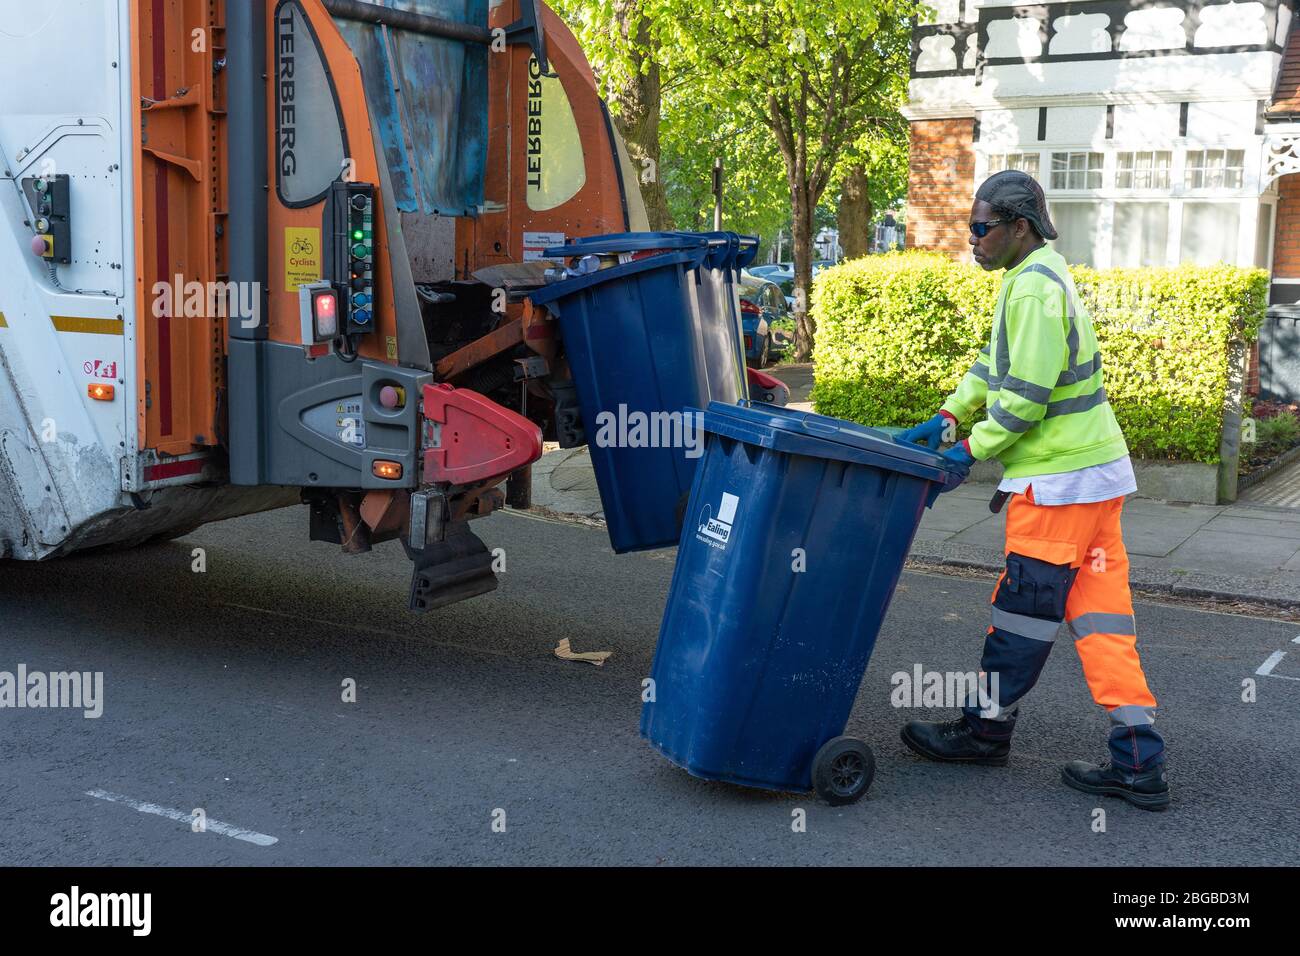 London, UK. Tuesday, 21 April, 2020. Refuse collectors working in a street in Ealing. Key workers have been praised for keeping services going during the coronavirus pandemic crisis. Photo date: Tuesday, April 21, 2020. Photo: Richard Gray/Alamy Stock Photo